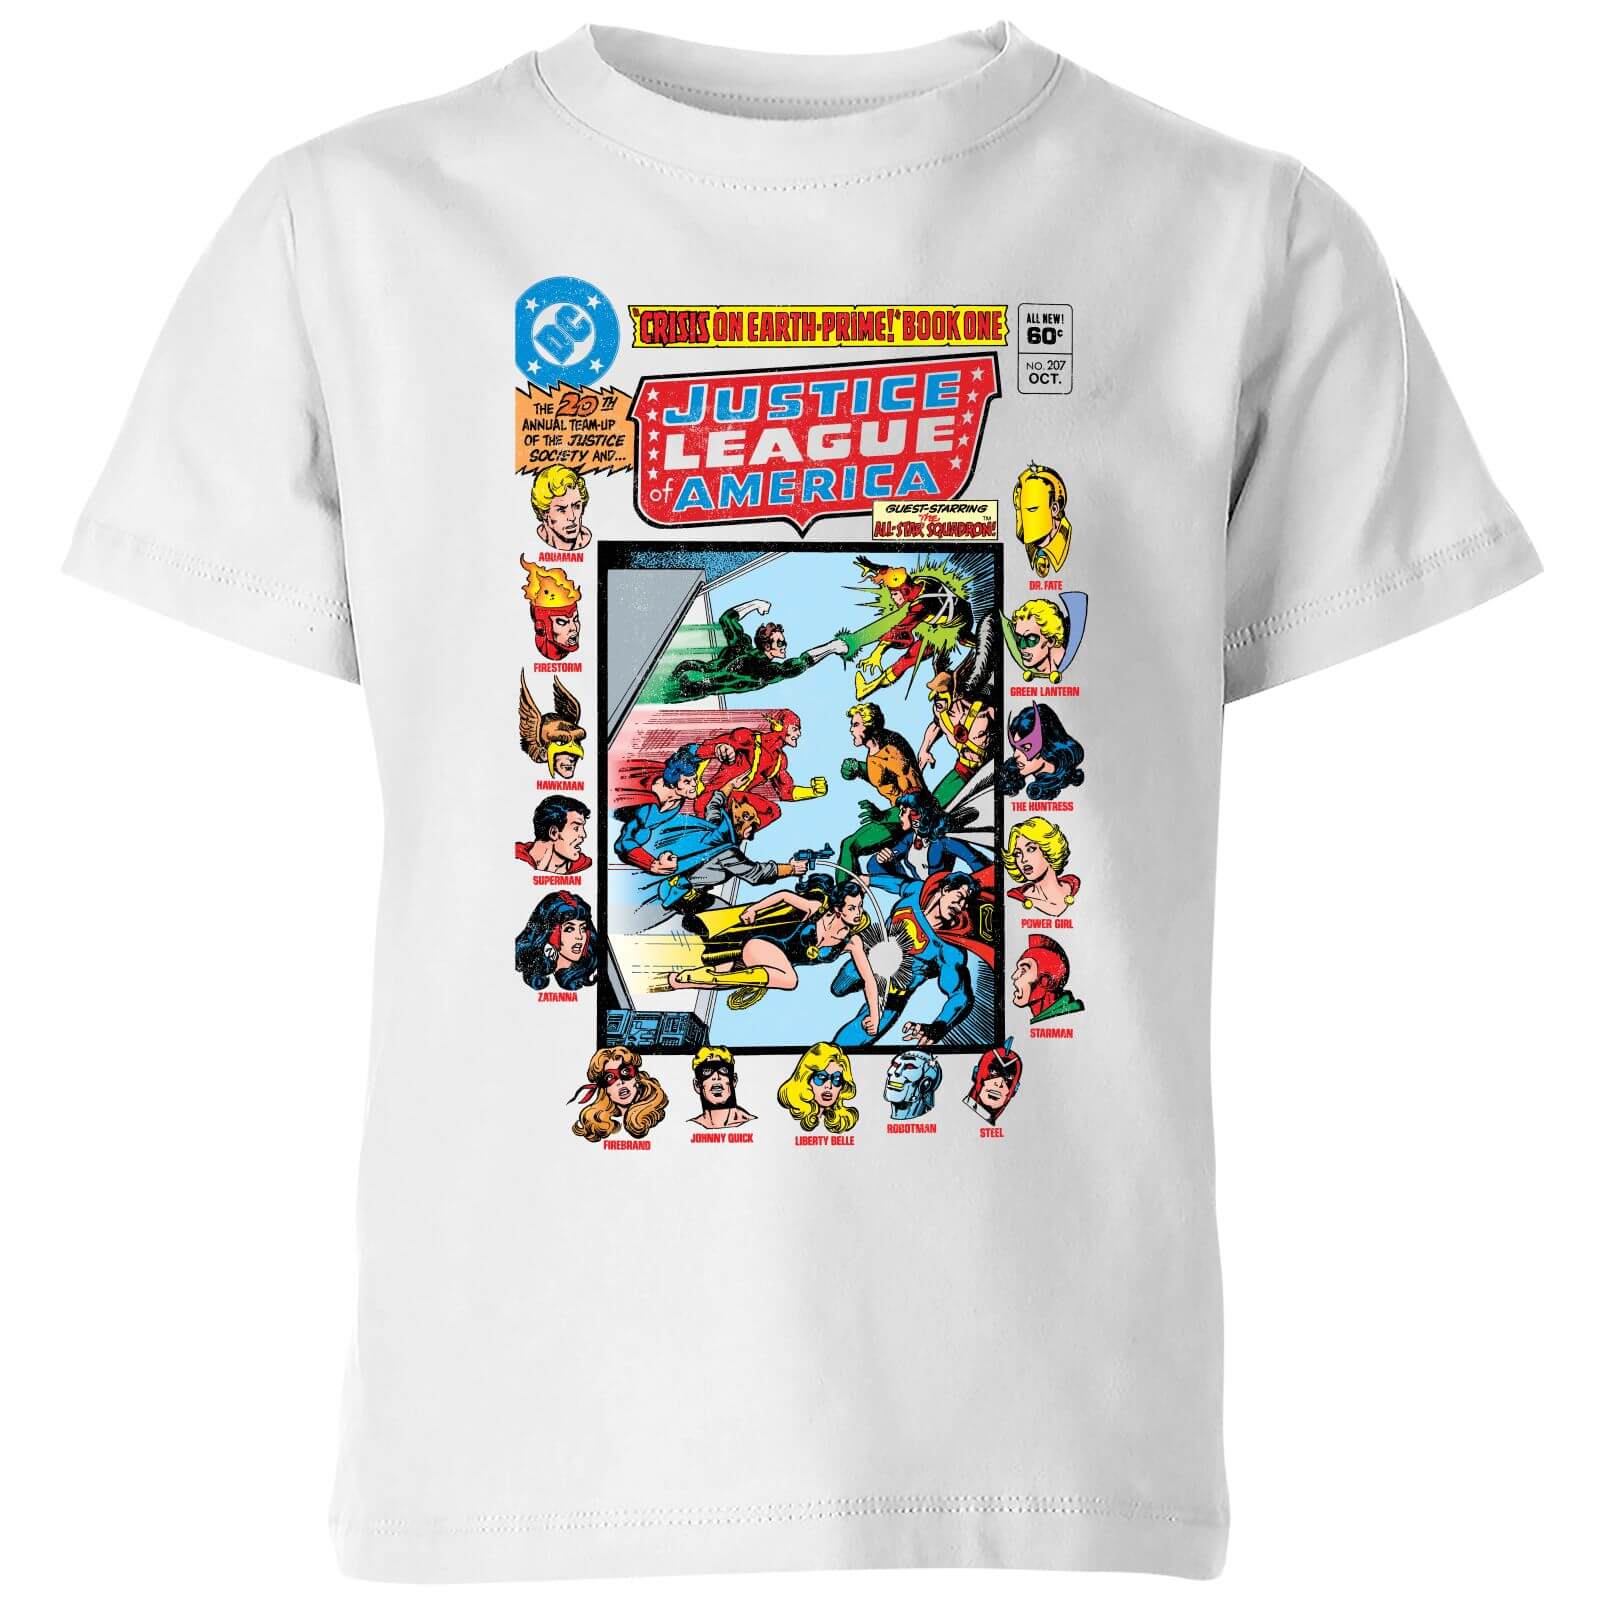 Justice League Crisis On Earth-Prime Cover Kids' T-Shirt - White - 7-8 Years - White